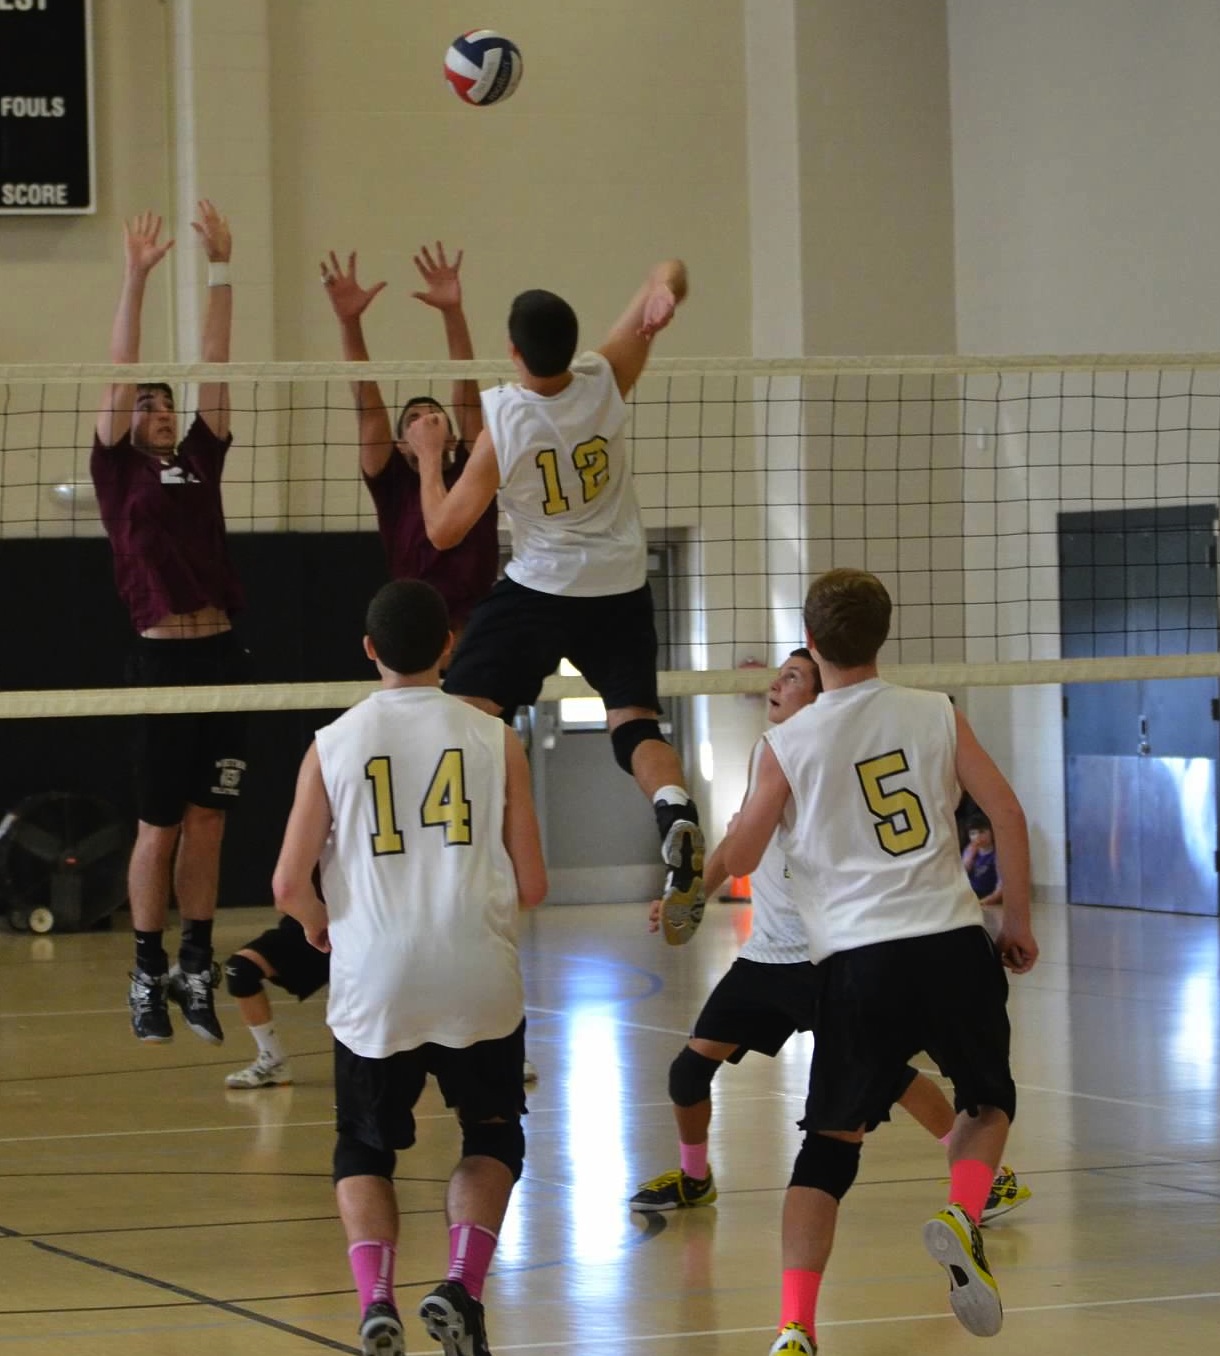 Dylan Missry is Mr. Volleyball in Sachem | Sachem Report